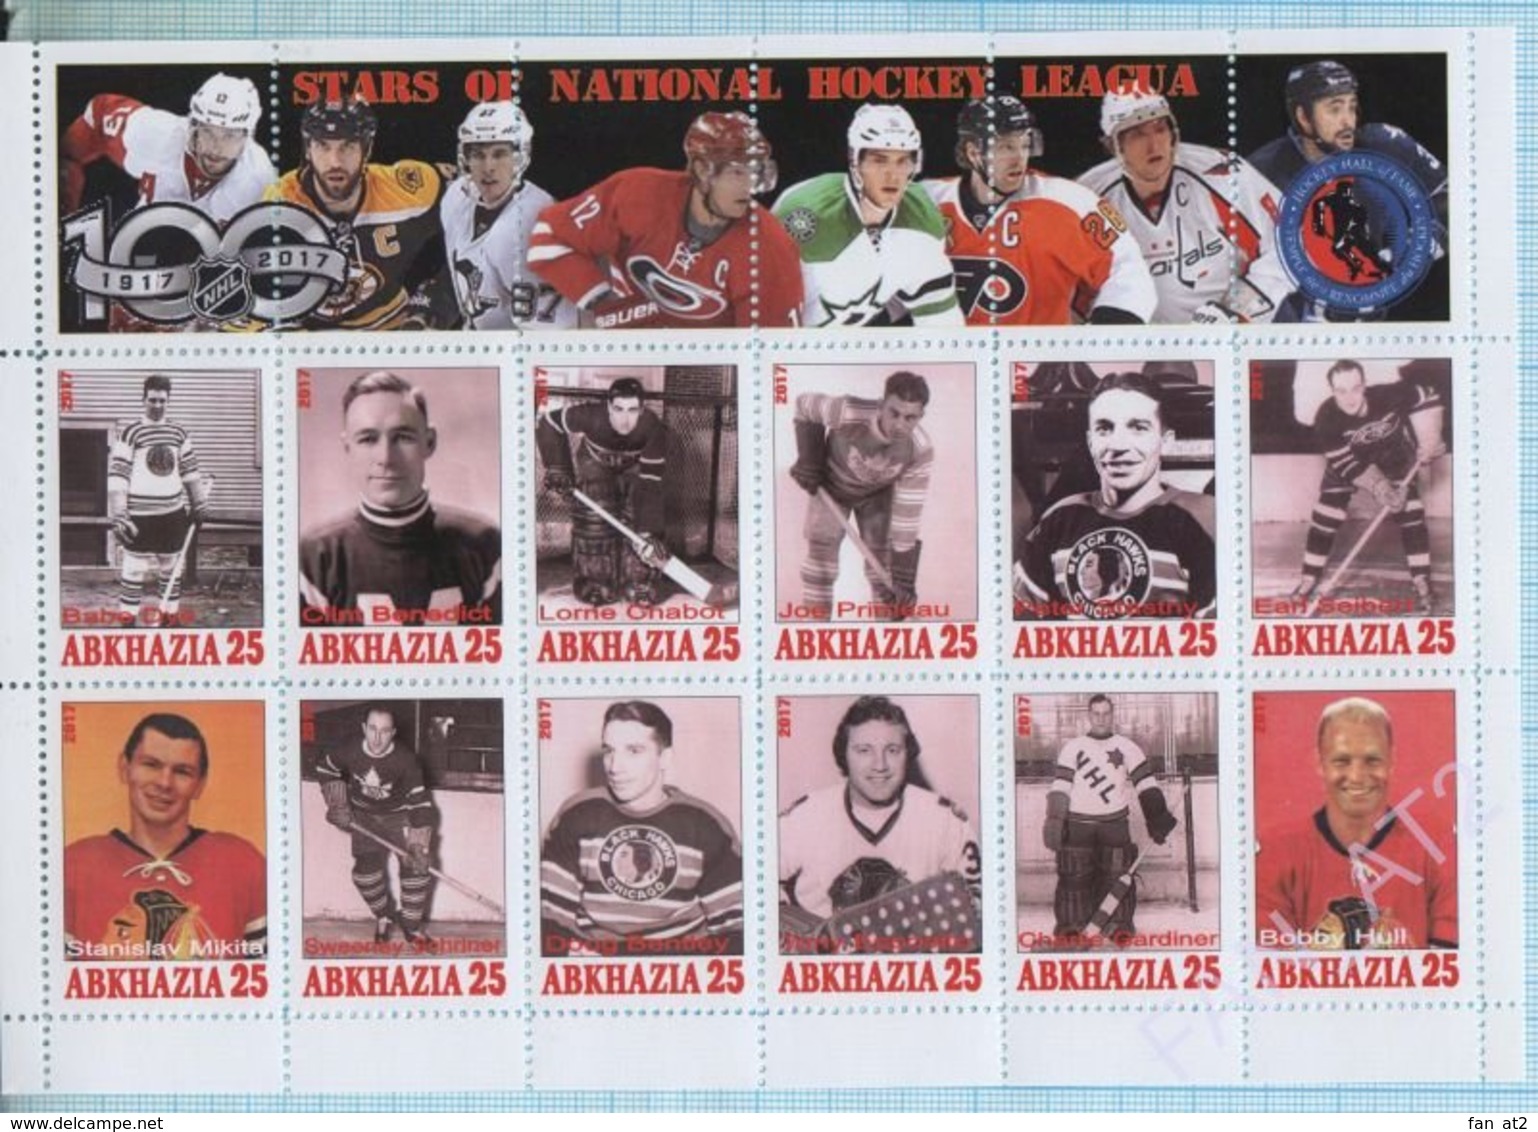 Abkhazia / Stamps / Private issue. Sport. Hockey. NHL 100 years. STARS OF NATIONAL HOCKEY LEAGUA. 2017.